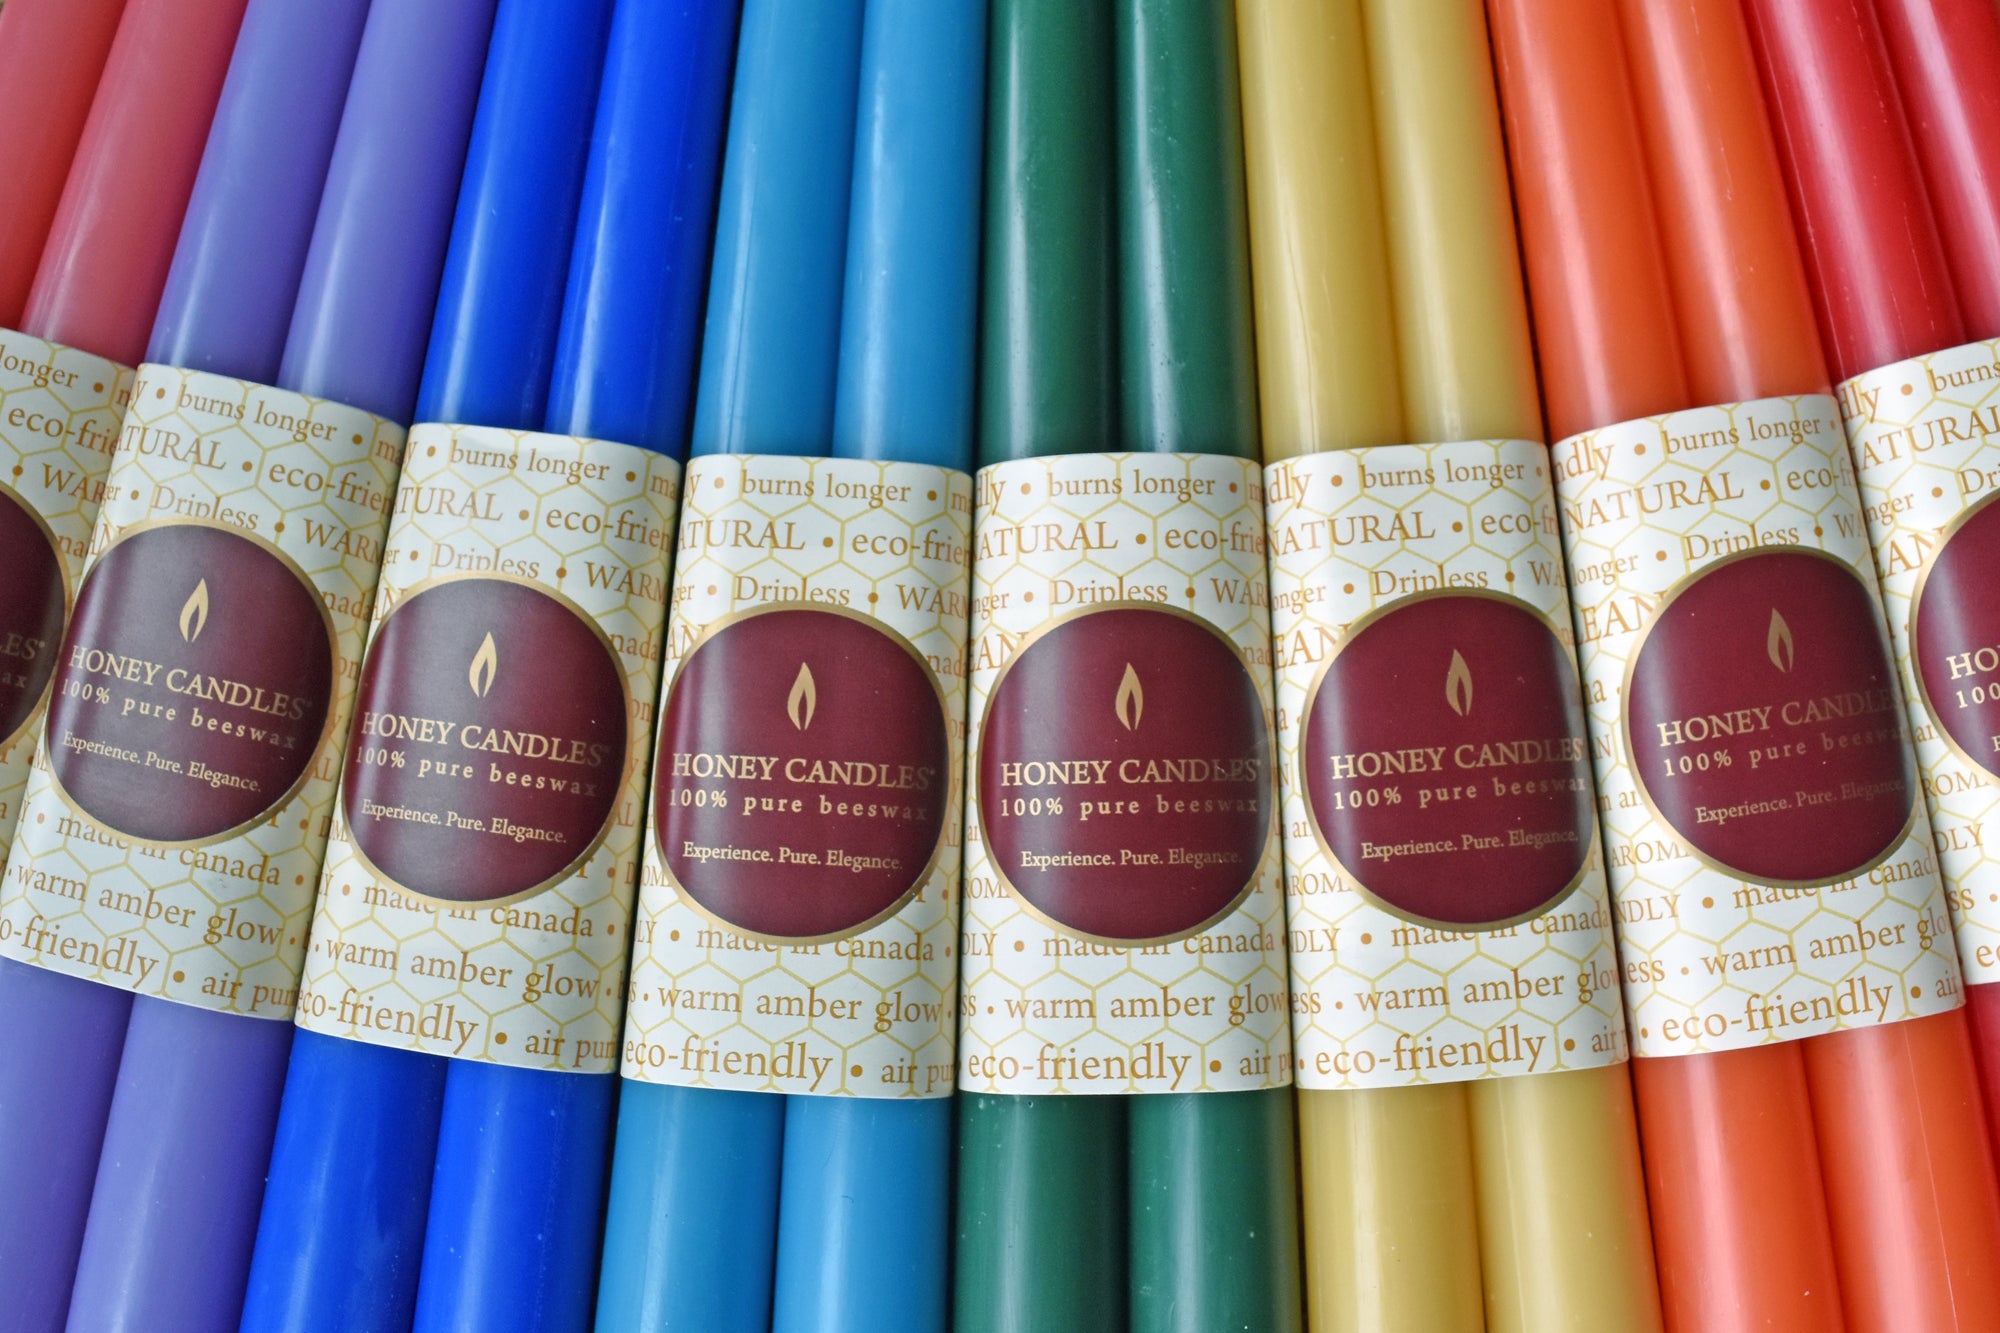 We use Enviro-dyes in our Colored Beeswax Candles